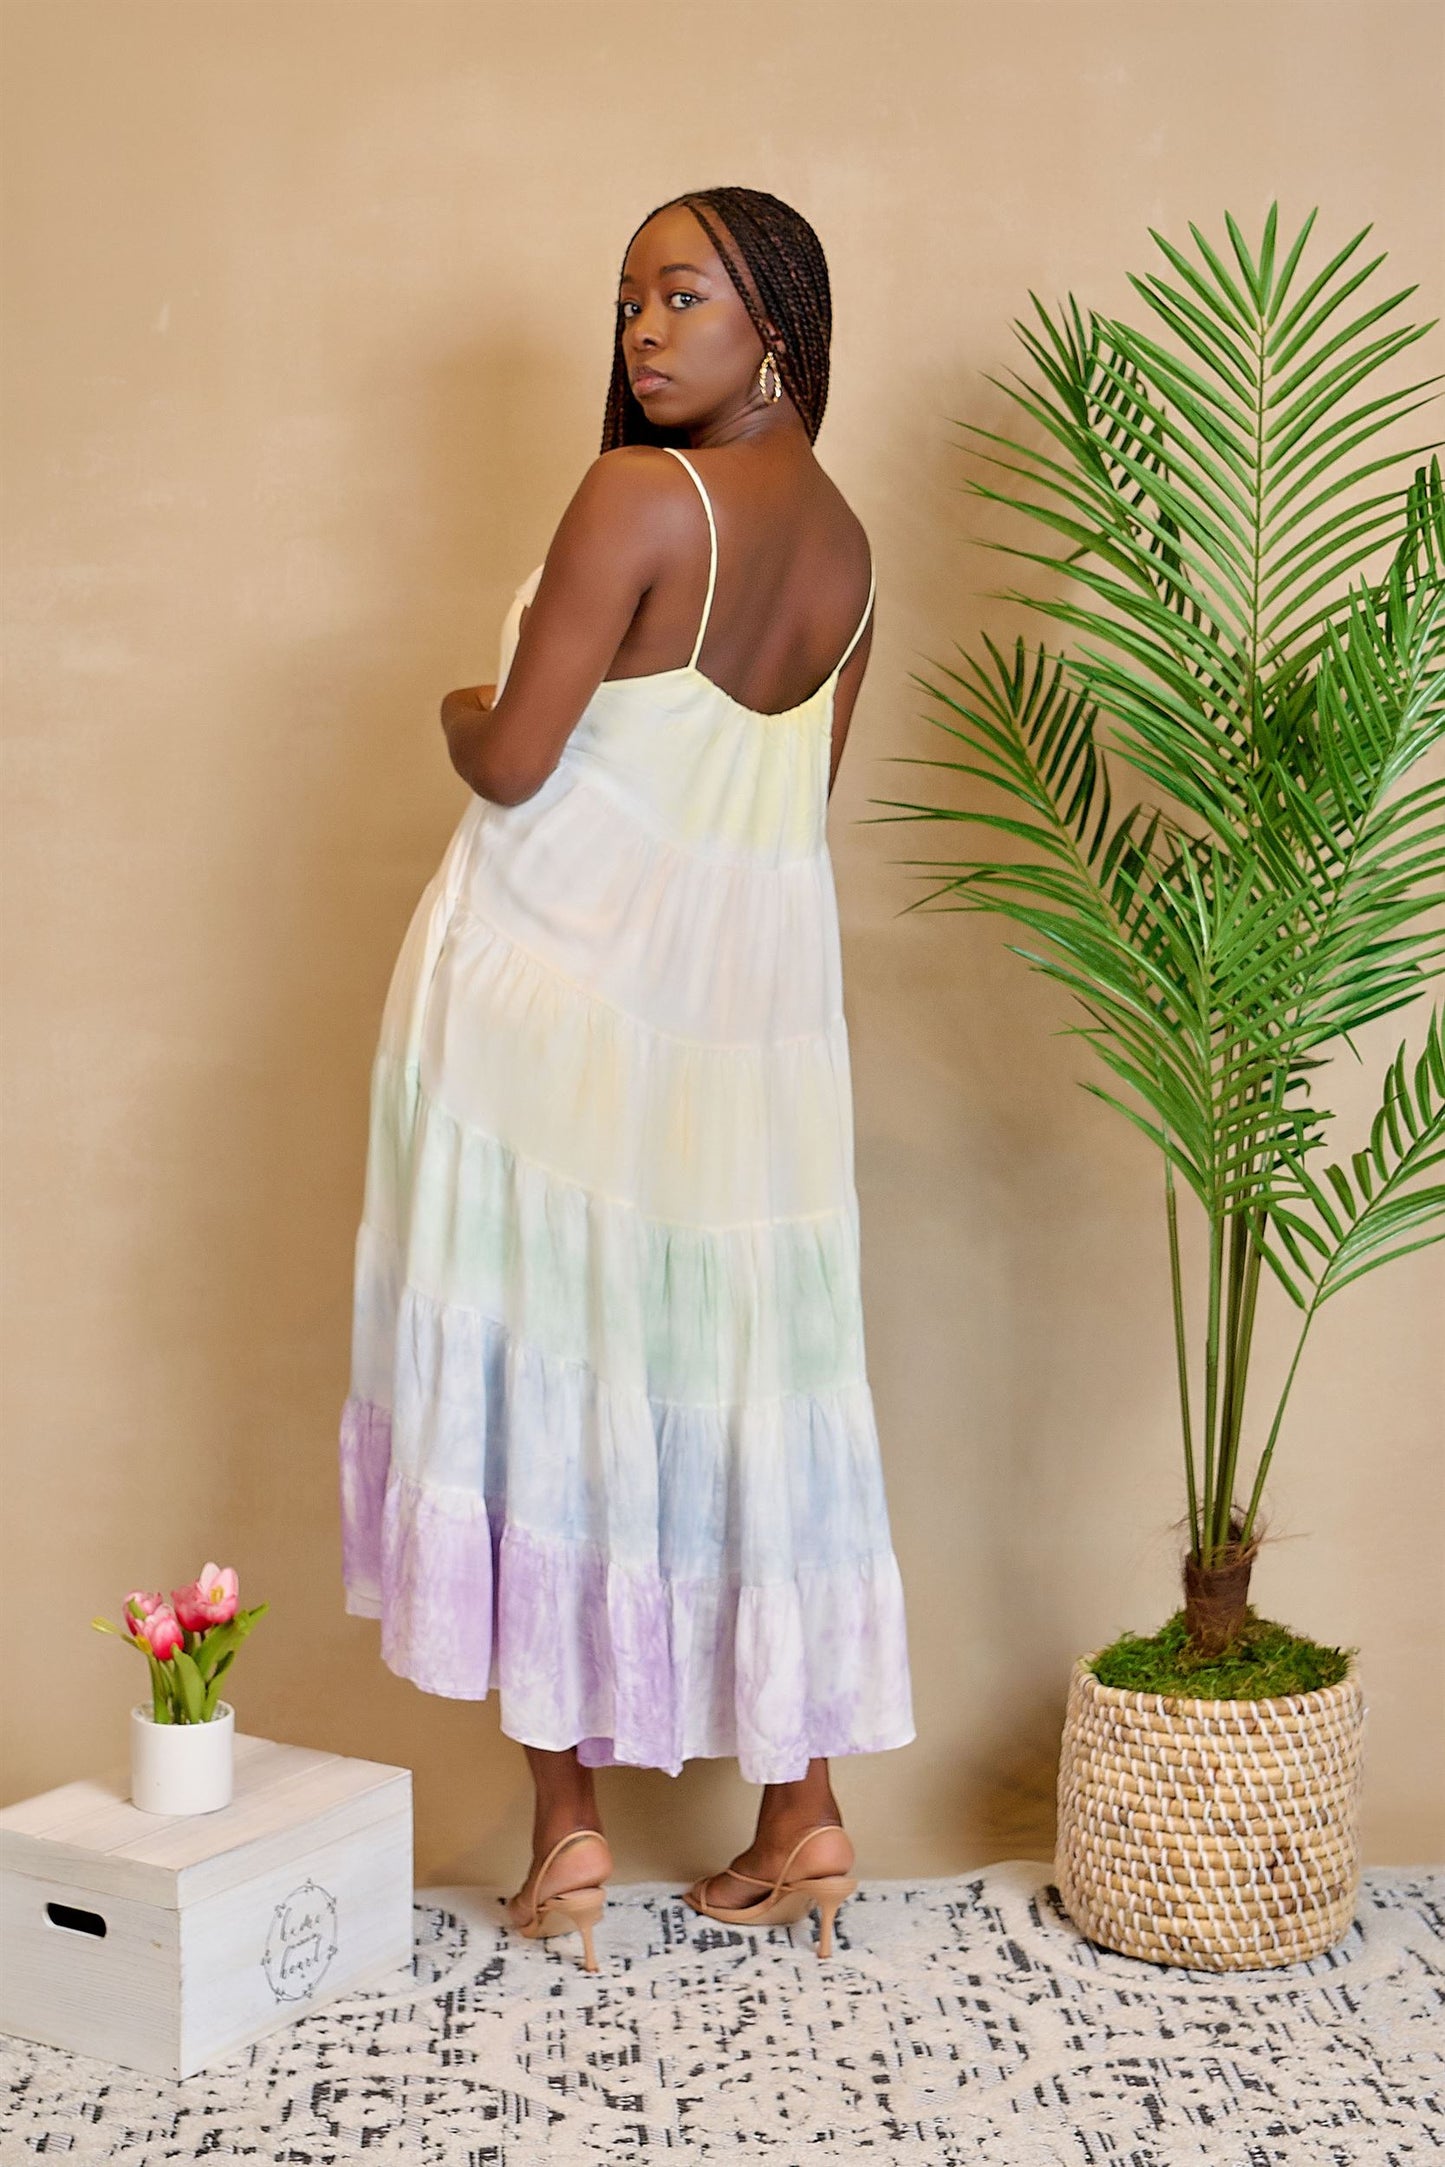 Over the Meadow Multi-Tier Tie-Dye Dress with Tie Straps